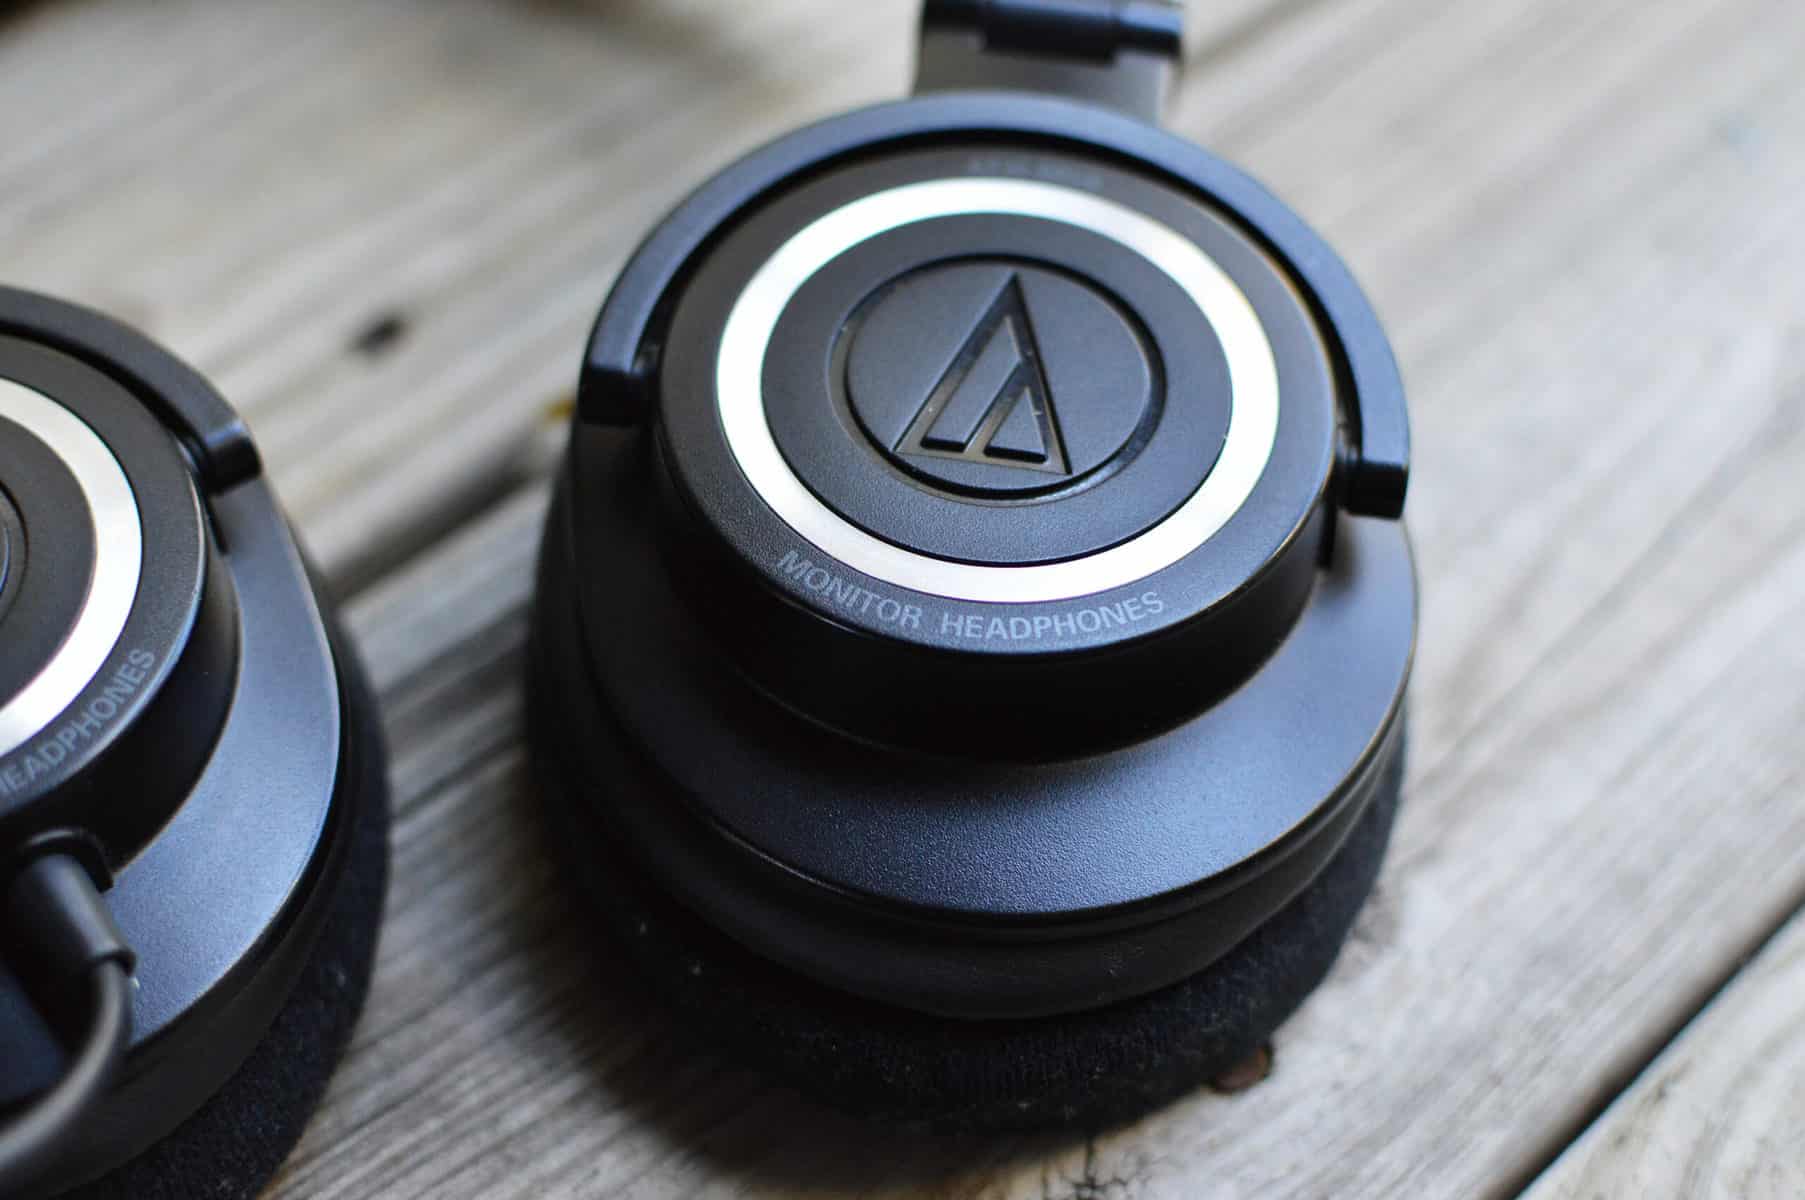 The Audio-Technica ATH-M50x headset sitting on a wooden platform